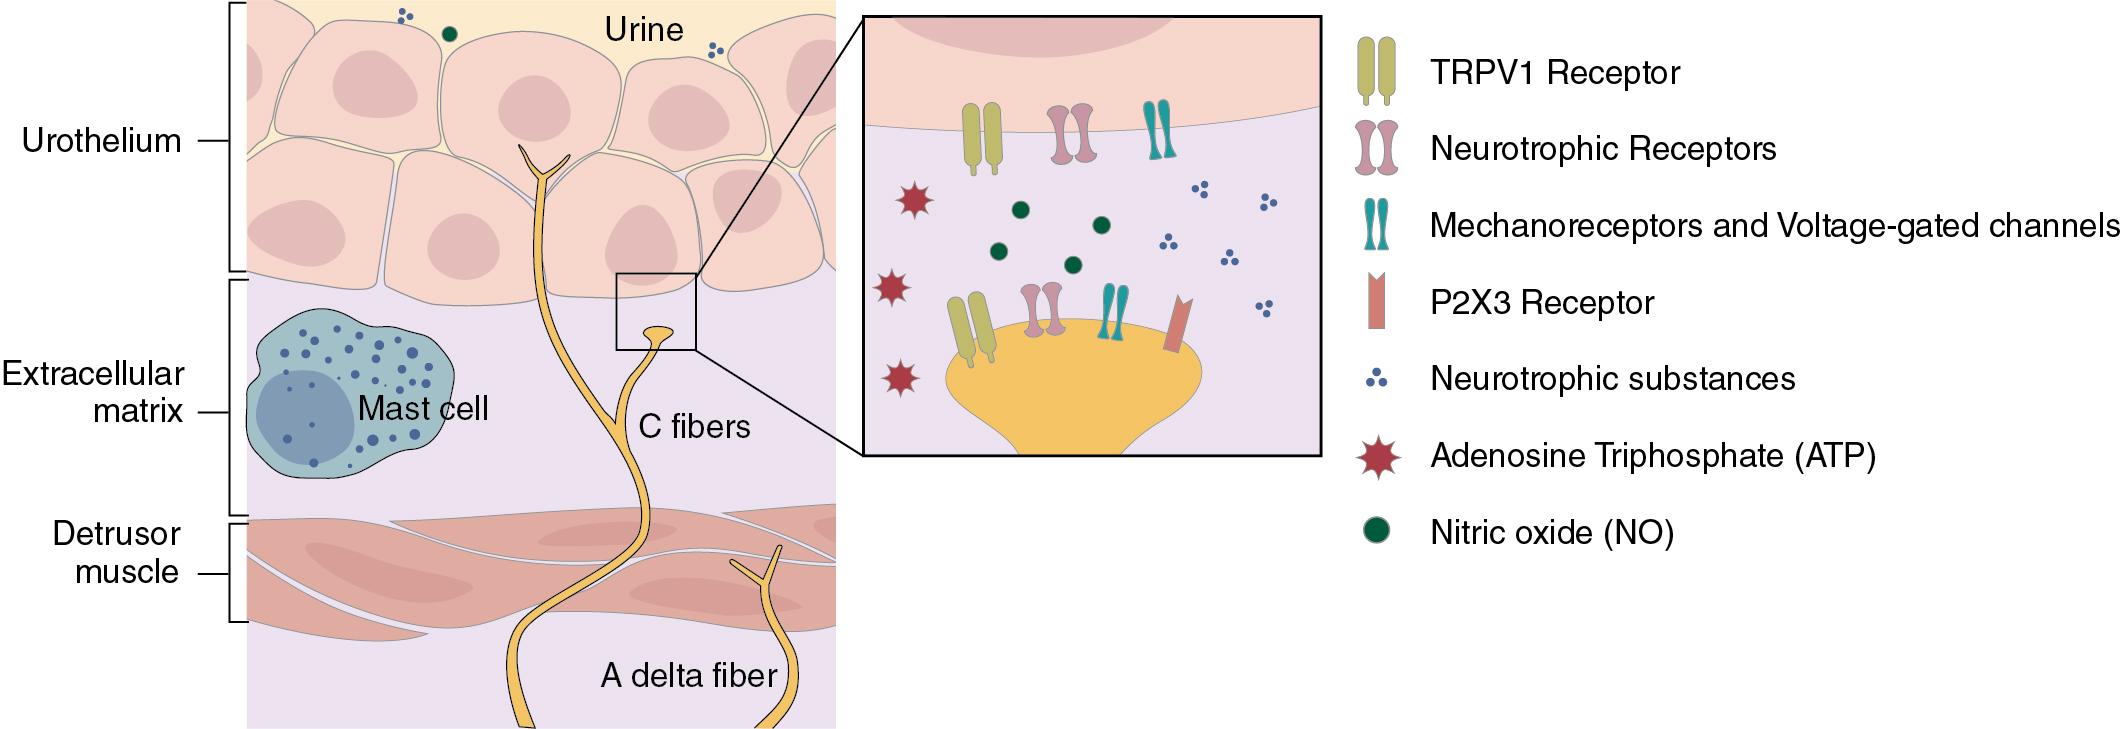 Fig. 3.2, Afferent signaling in the bladder wall. The urothelium “network,” as well as the Aδ and C fibers, play roles and communicate. Receptors such as TRPV1 and other neurotrophic and mechanoreceptors respond to potential neurotrophins in the surrounding matrix. Neurotrophins may be produced by mast cells, detrusor cells, or the urothelium itself, which perpetuate the stimulation and contraction of the detrusor muscle (via purinergic receptors; see Fig. 3.6 ). The afferent fibers can also demonstrate maladaptive neuroplasticity and increase production of receptors, leading to hypersensitivity.